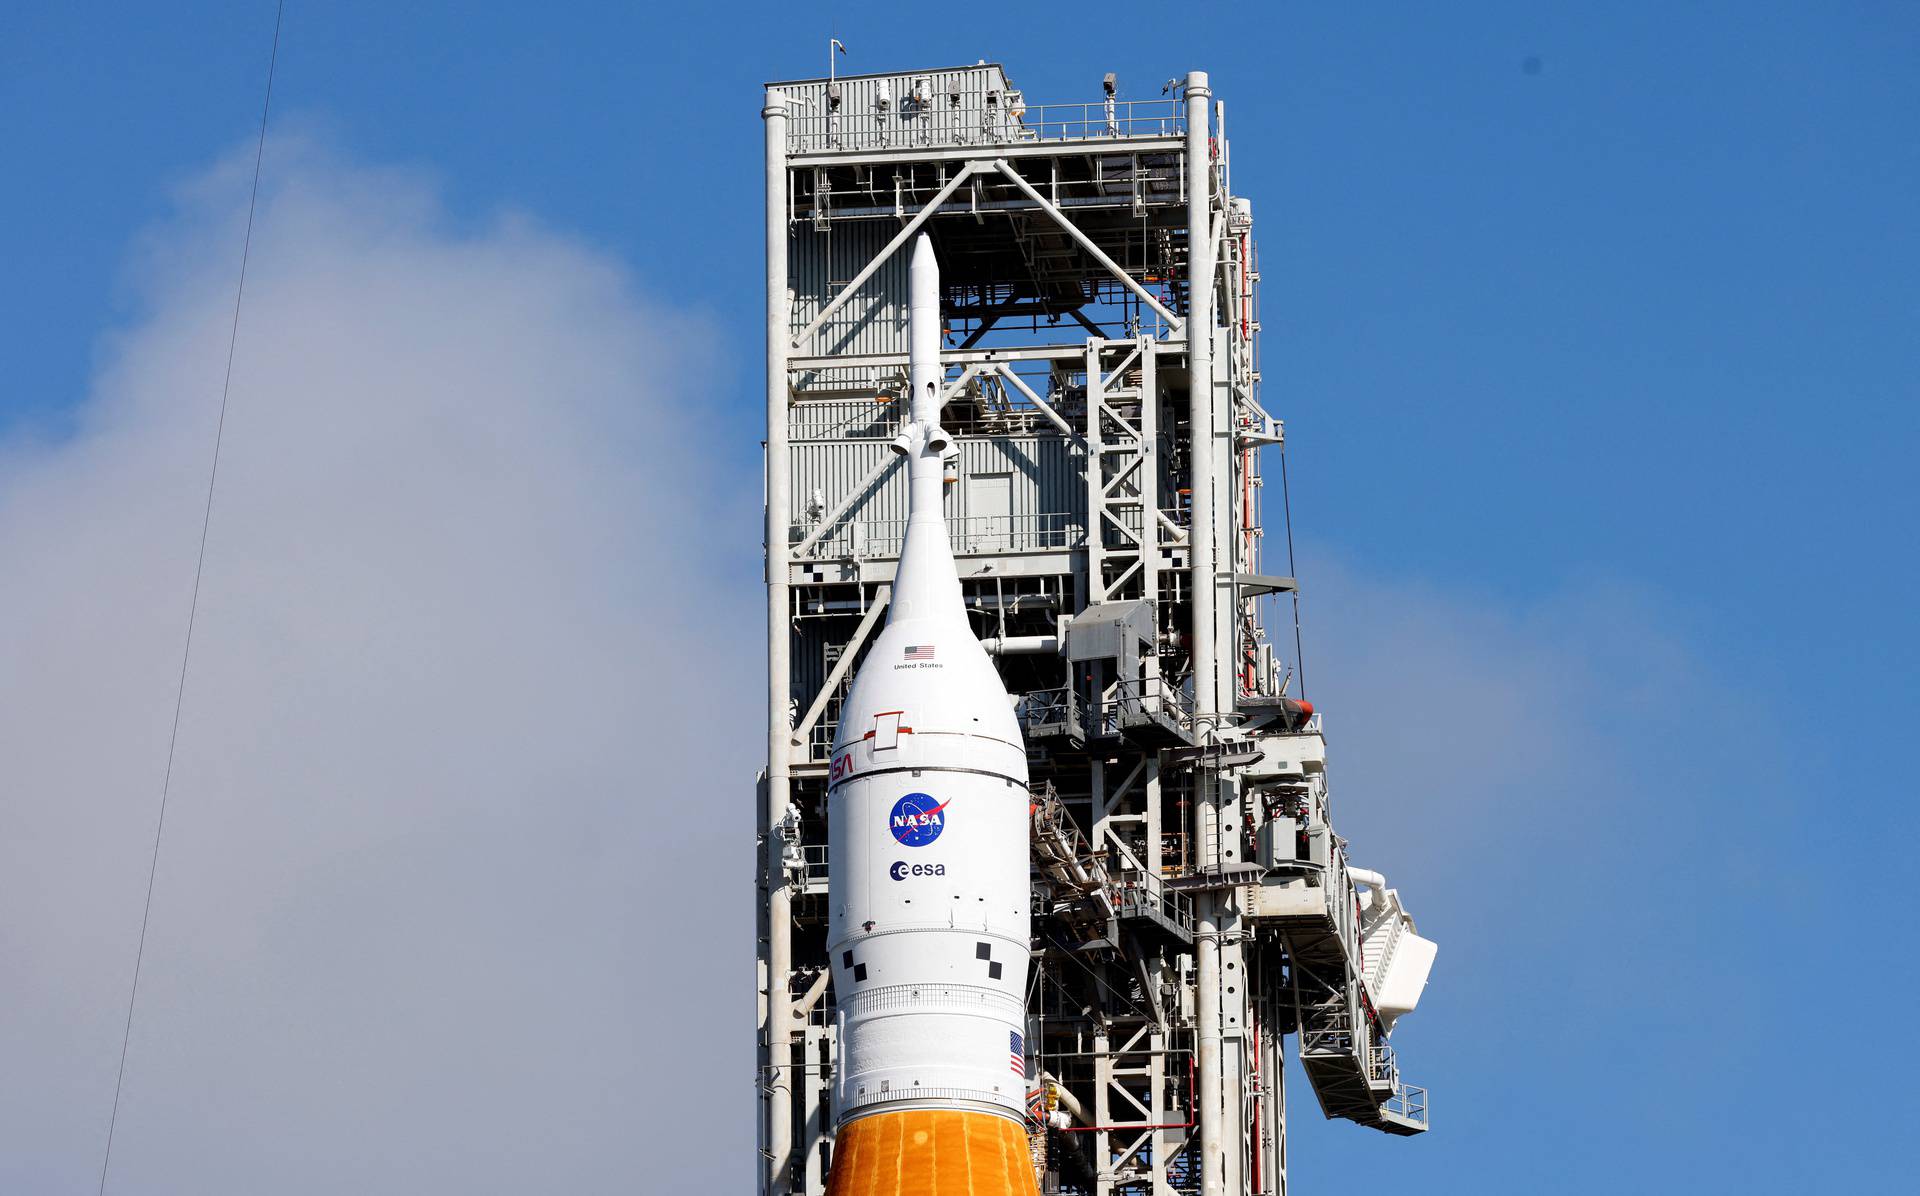 NASA's next-generation moon rocket, the Space Launch System (SLS) rocket with the Orion crew capsule, stands at launch complex 39-B as preparations continue for the Artemis 1 mission